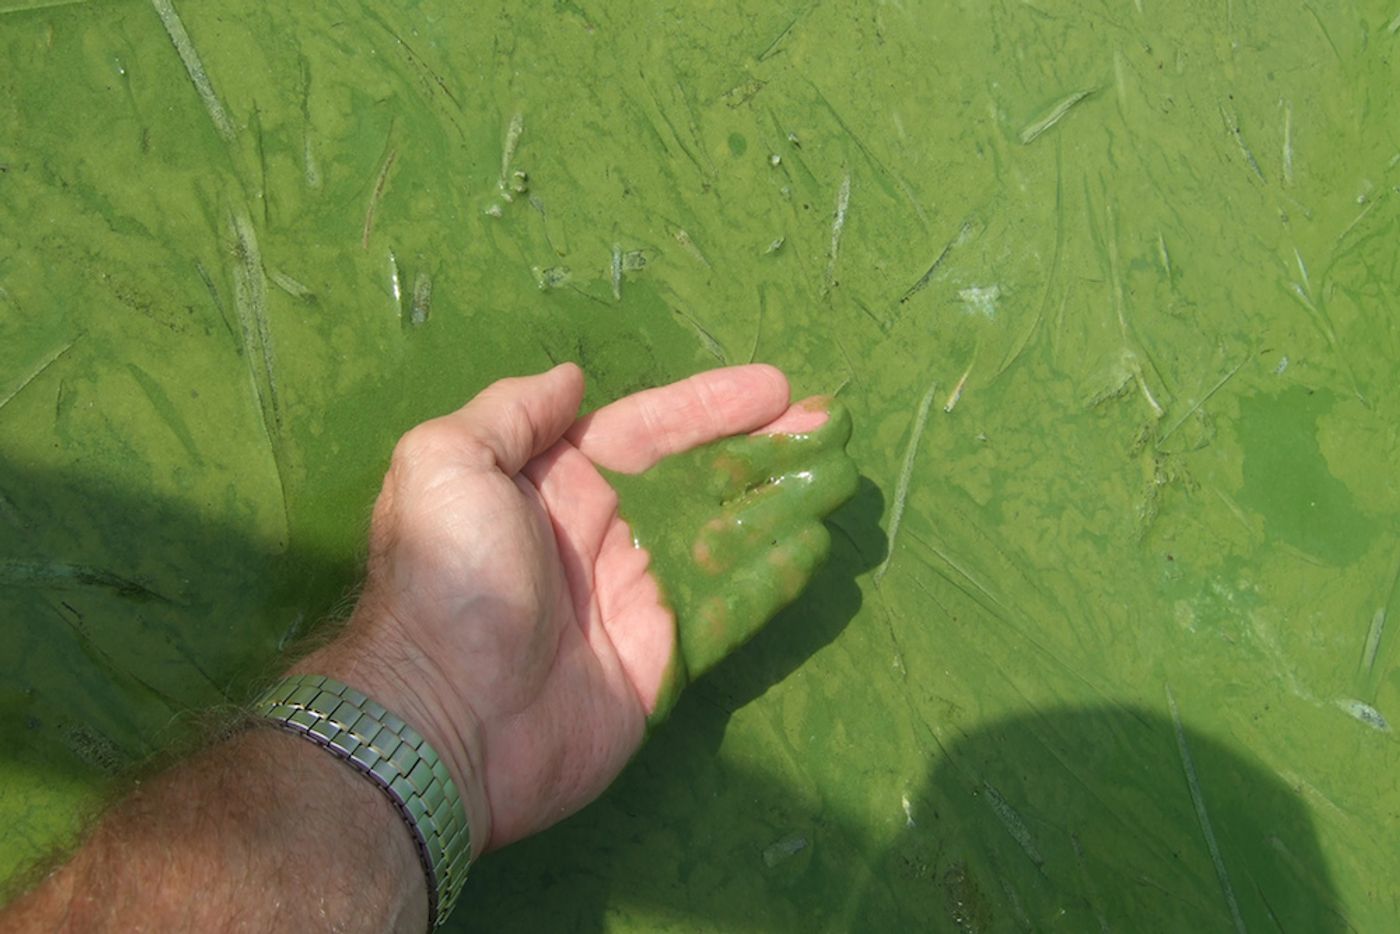 Harmful Lake Erie algal blooms worsened by power plant pollution. Photo: midwestenergynews.com